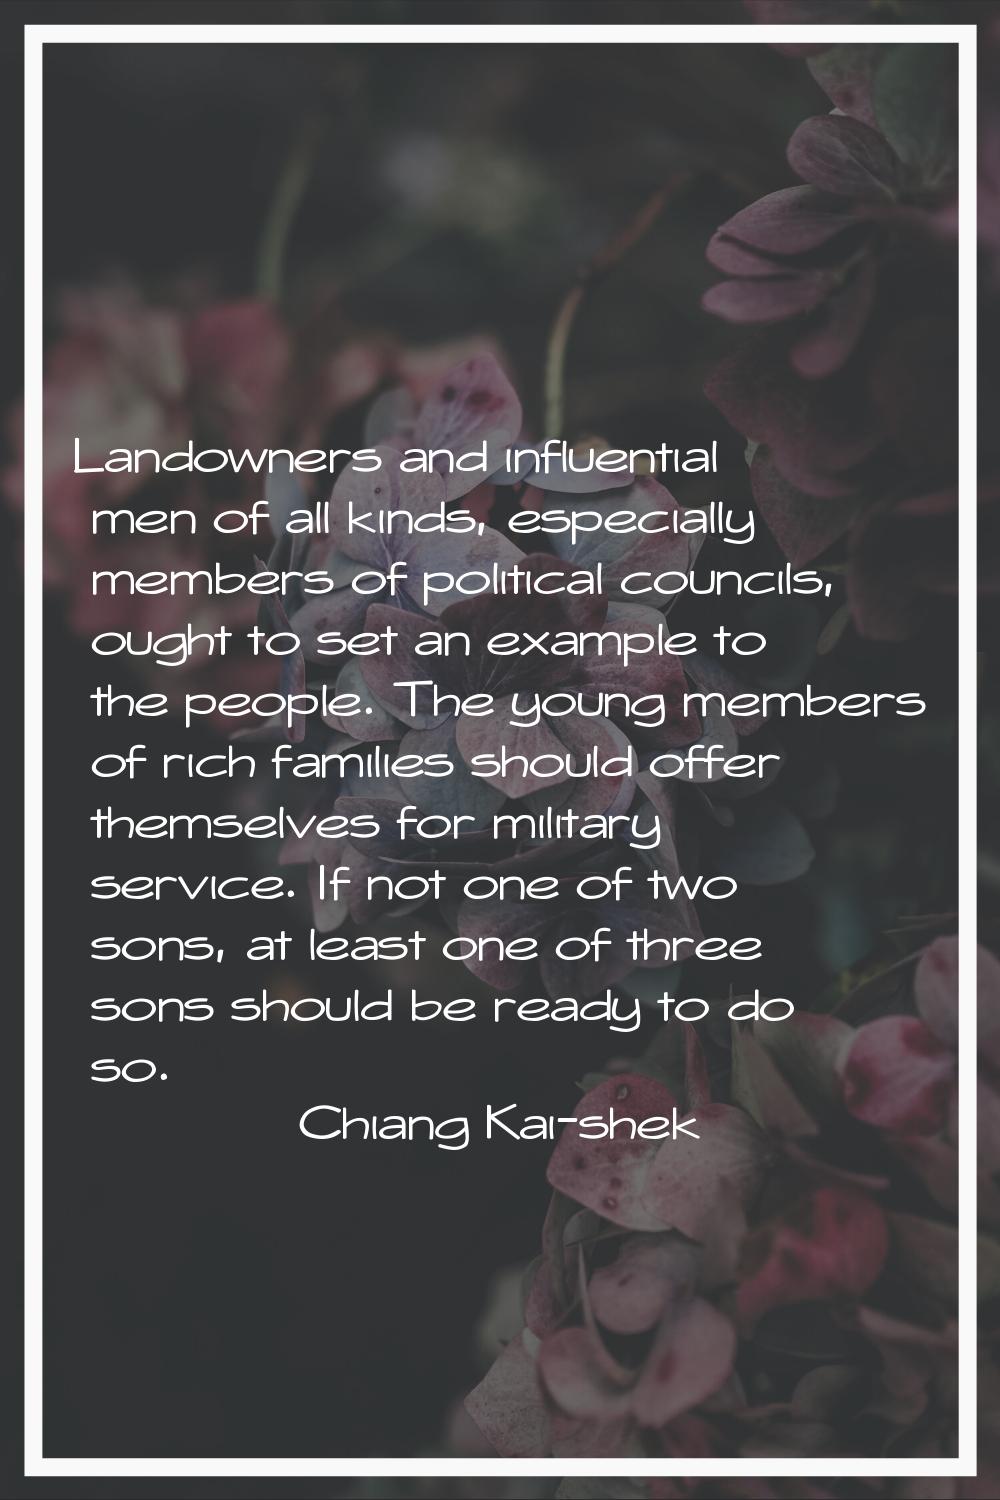 Landowners and influential men of all kinds, especially members of political councils, ought to set